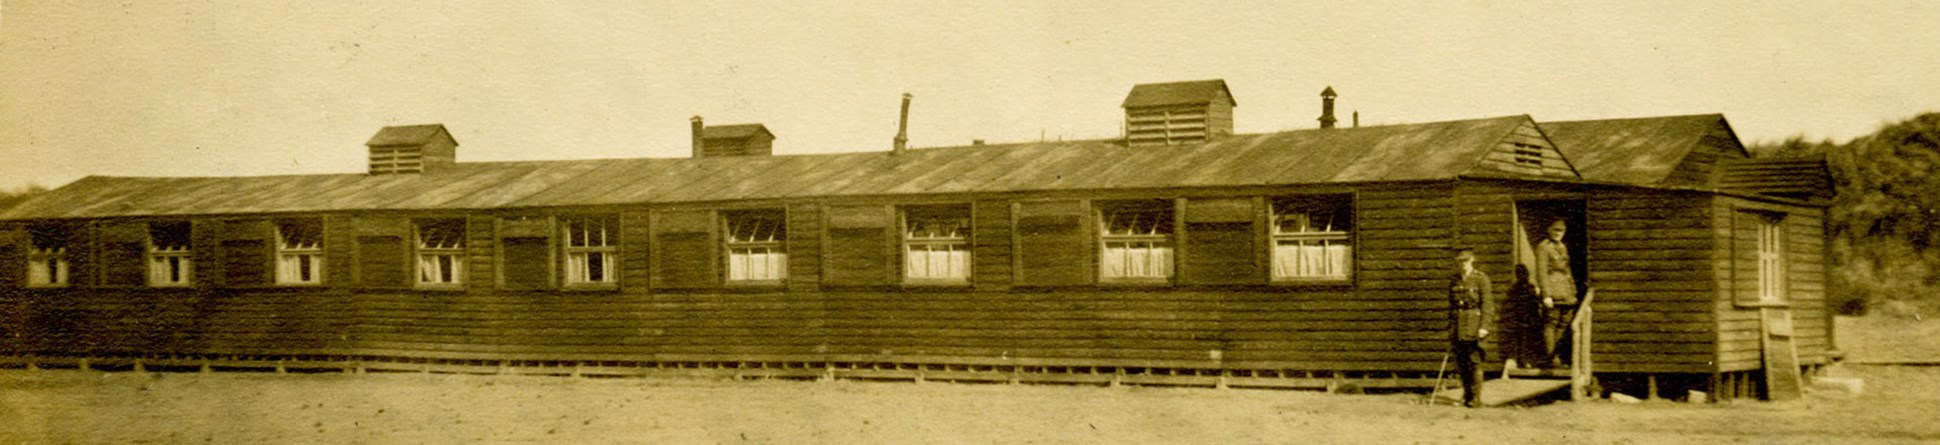 Southfleet, Lincolnshire, a long timber officers’ mess hut, to accommodate the new armies the Royal Engineers designed standardised huts.